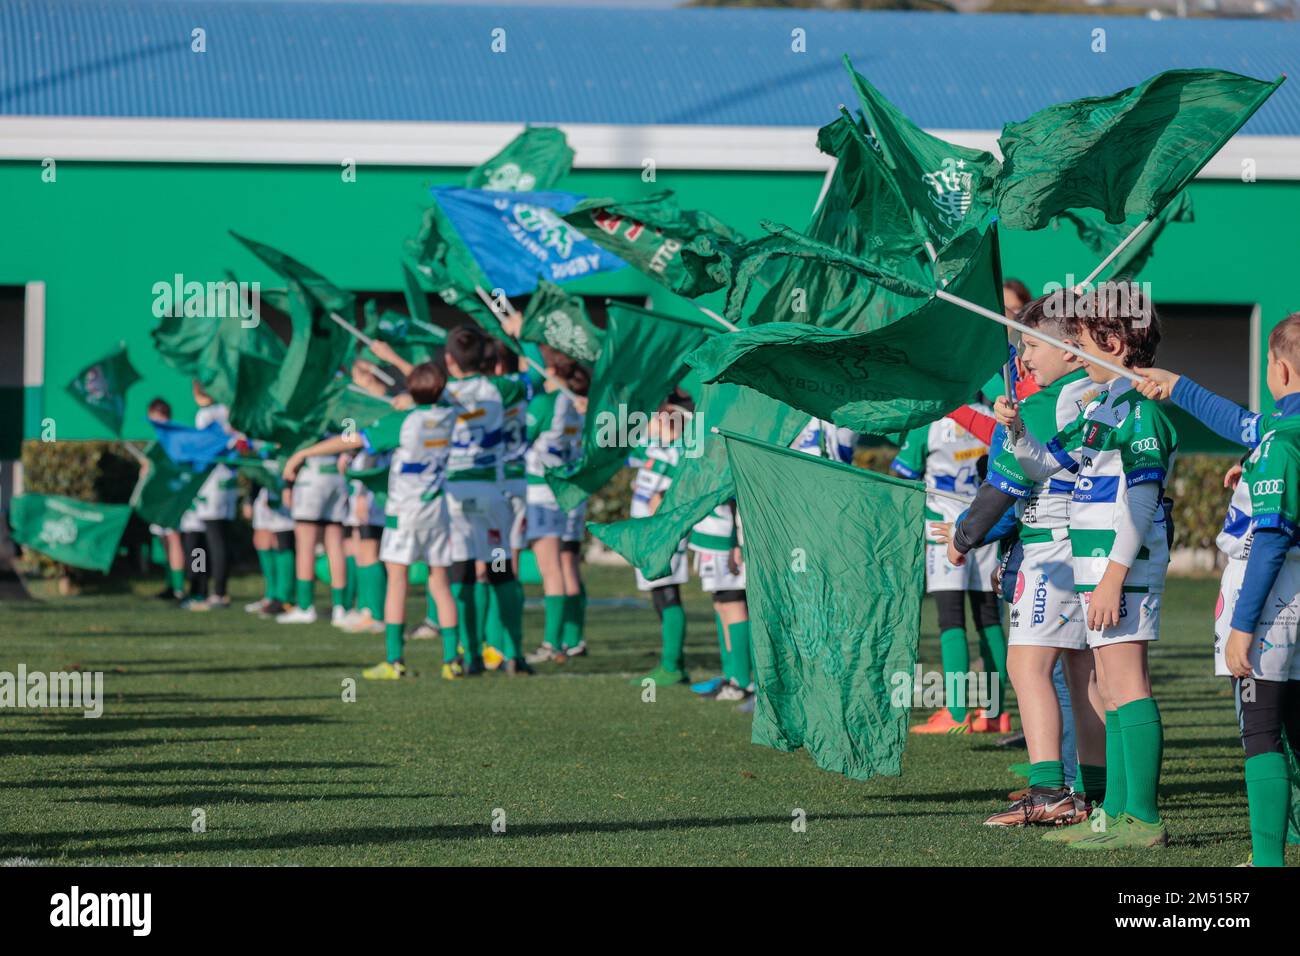 Treviso, Italia. 24th Dec, 2022. Benetton durante Benetton Rugby vs Zebre Rugby Club, partita United Rugby Championship a Treviso, Italia, Dicembre 24 2022 Credit: Independent Photo Agency/Alamy Live News Foto Stock